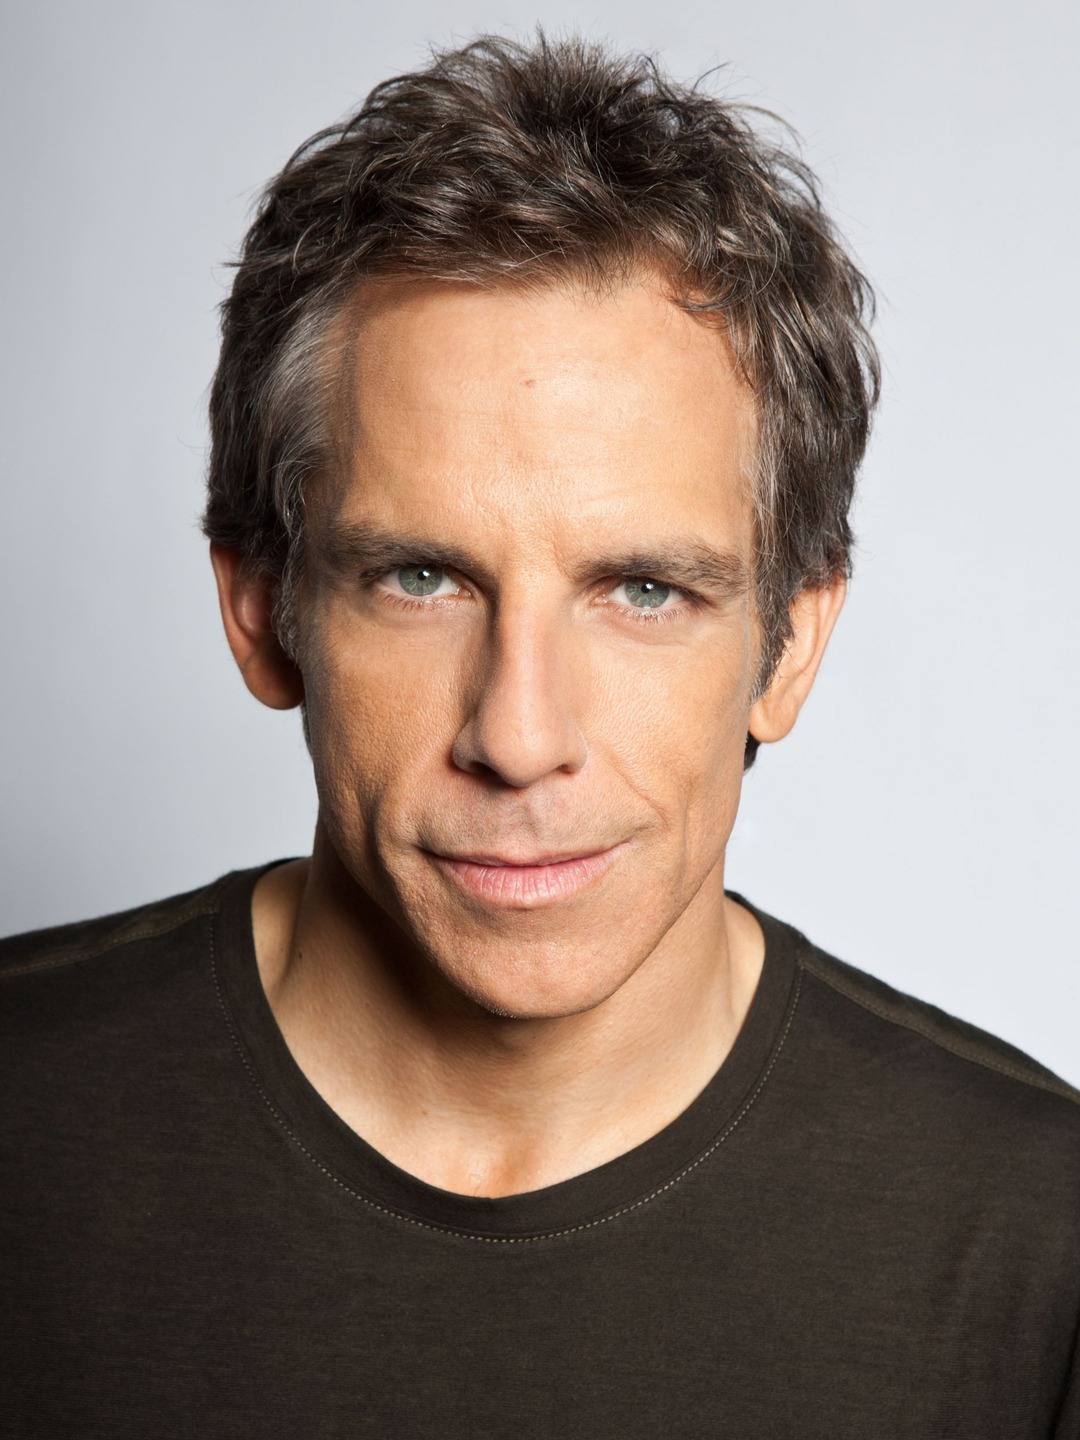 Ben Stiller who is his father